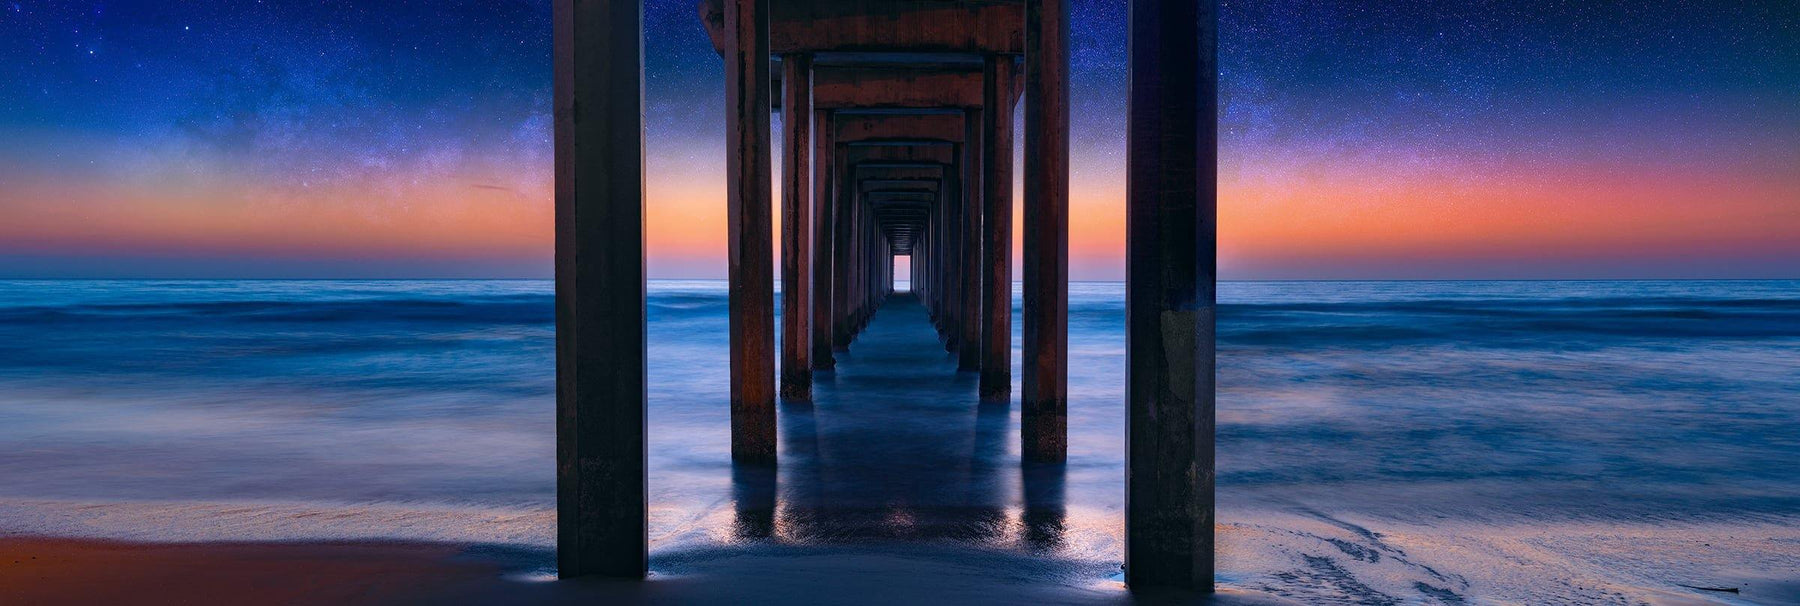 The ocean and Scripps Pier of La Jolla California with the glowing horizon and star filled sky in the background